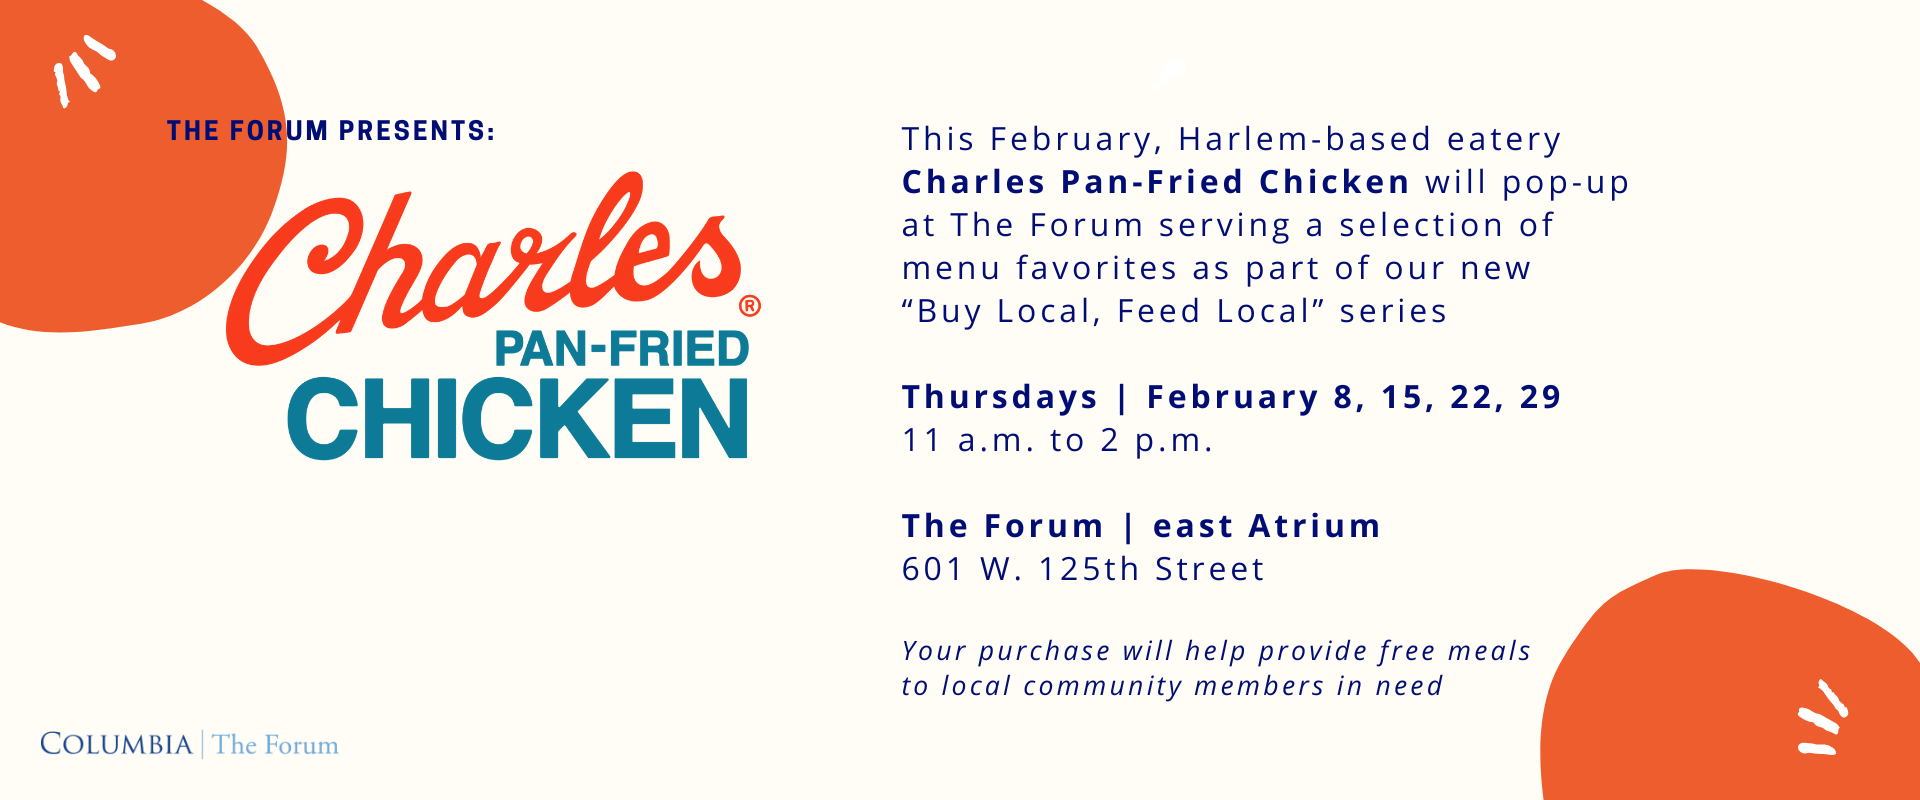 Flyer for Charles Pan-Fried Chicken Pop-up at The Forum